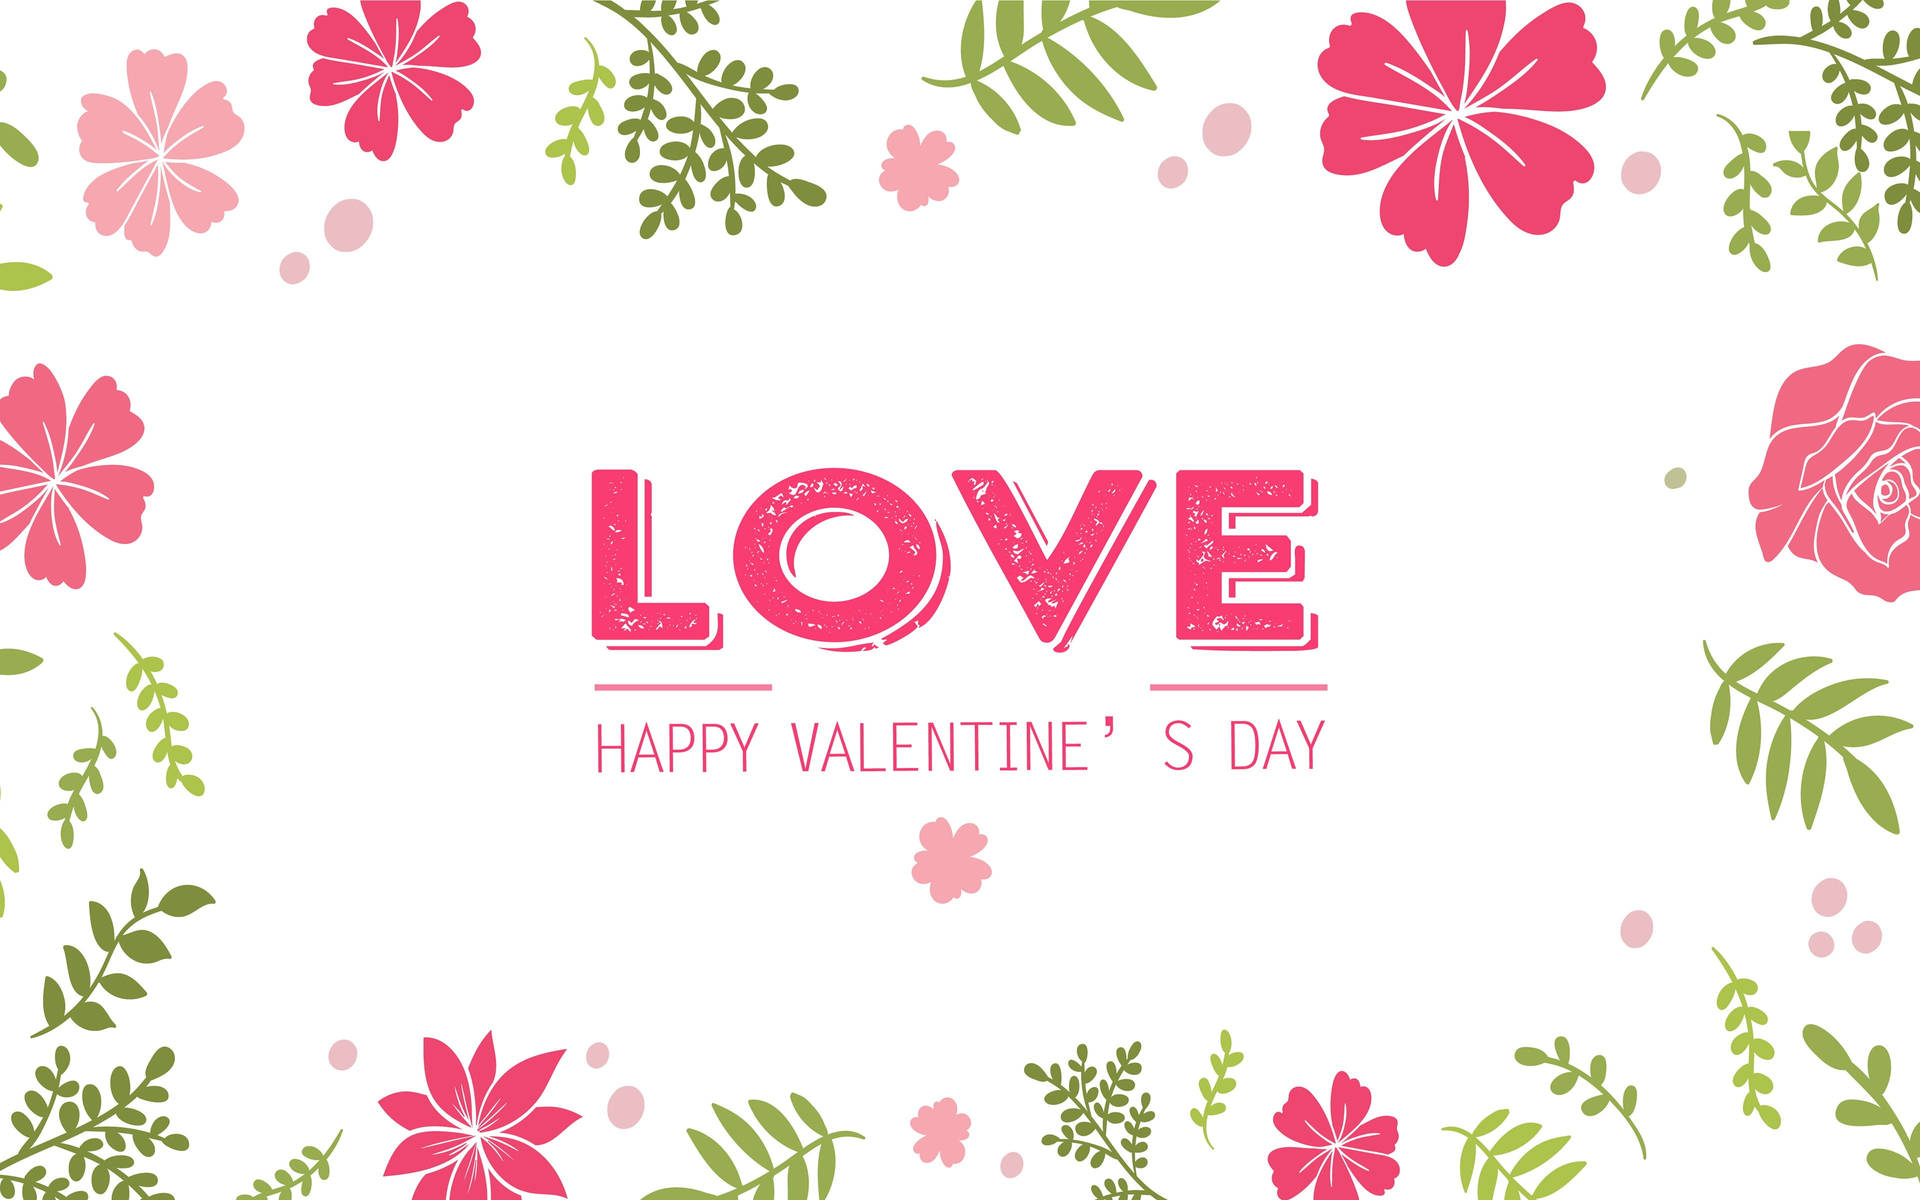 Flowers And Plants Happy Valentine’s Day Background